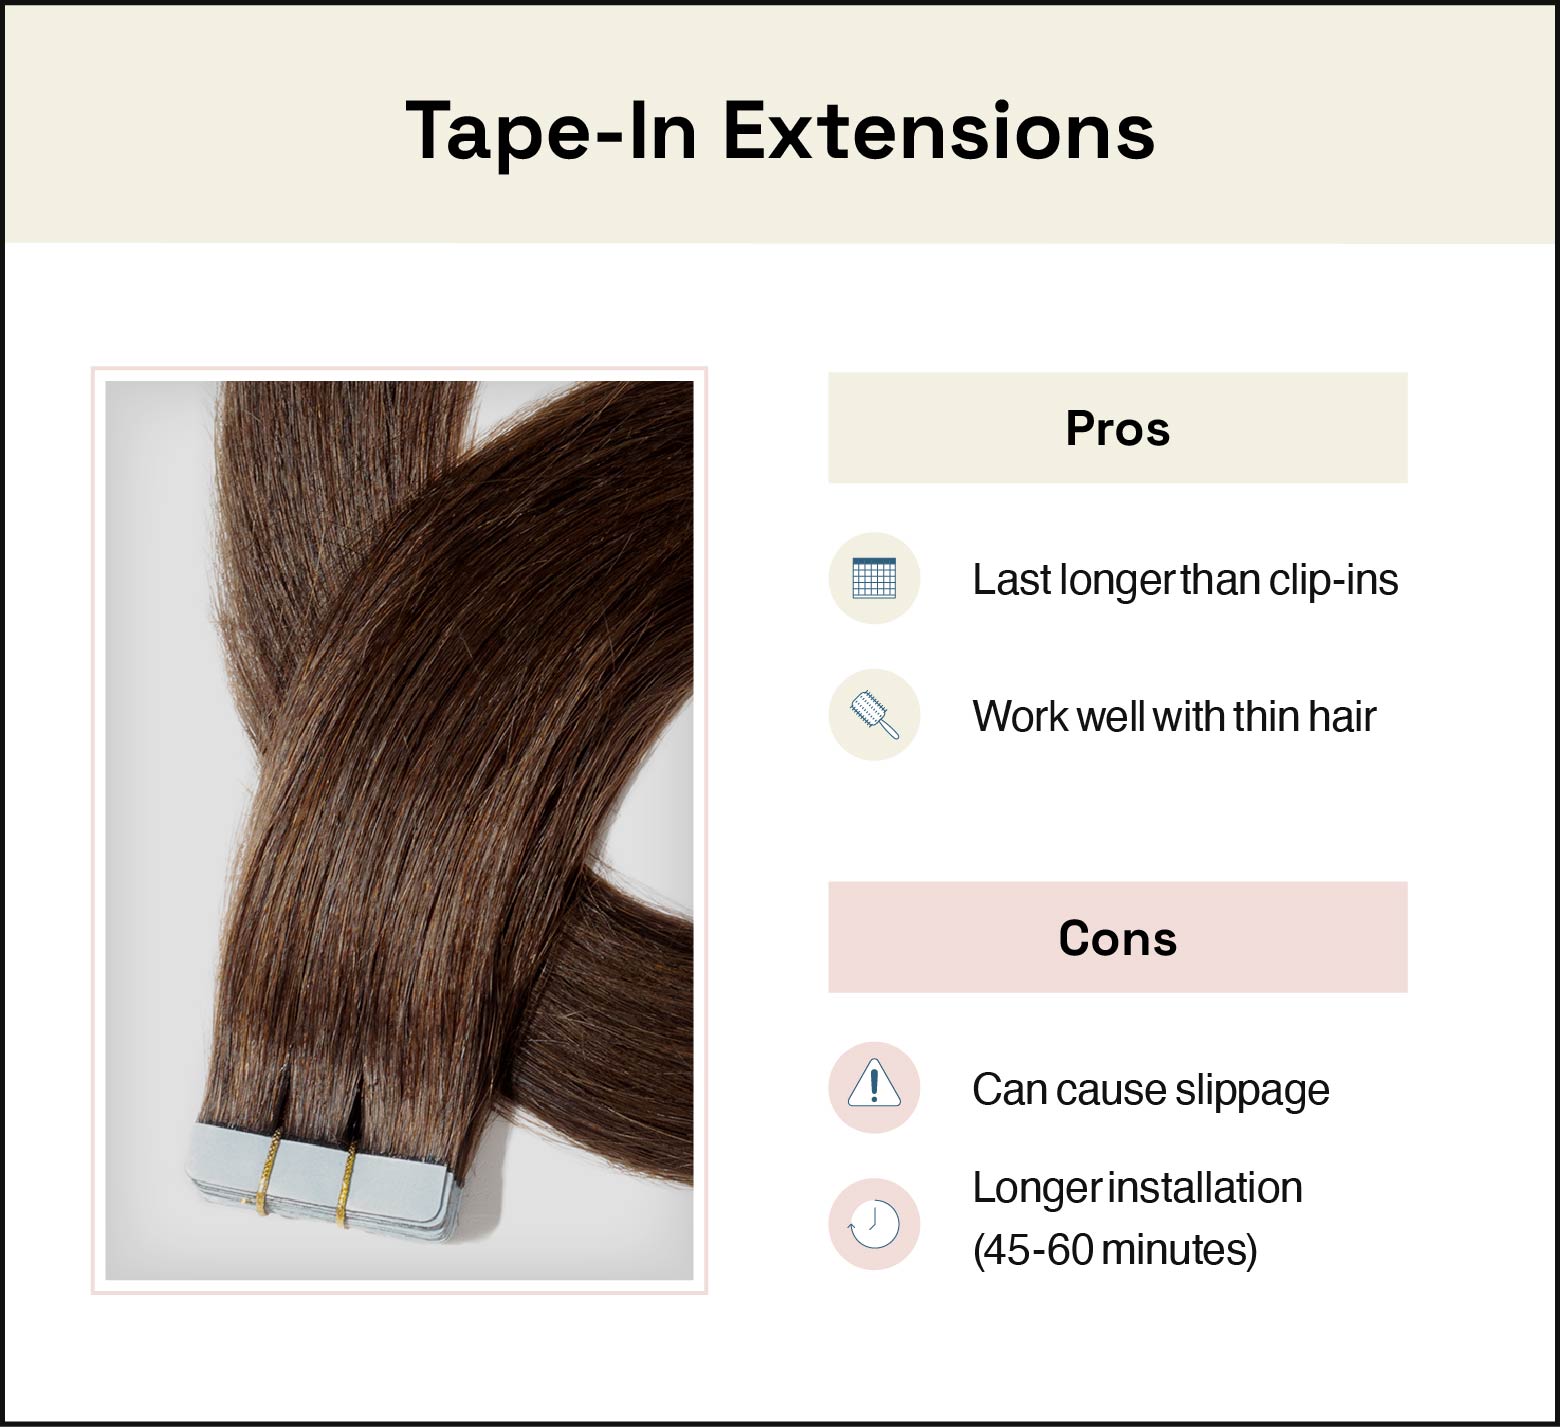 photo of brunette tape-in extensions on the left and list of pros and cons on the right